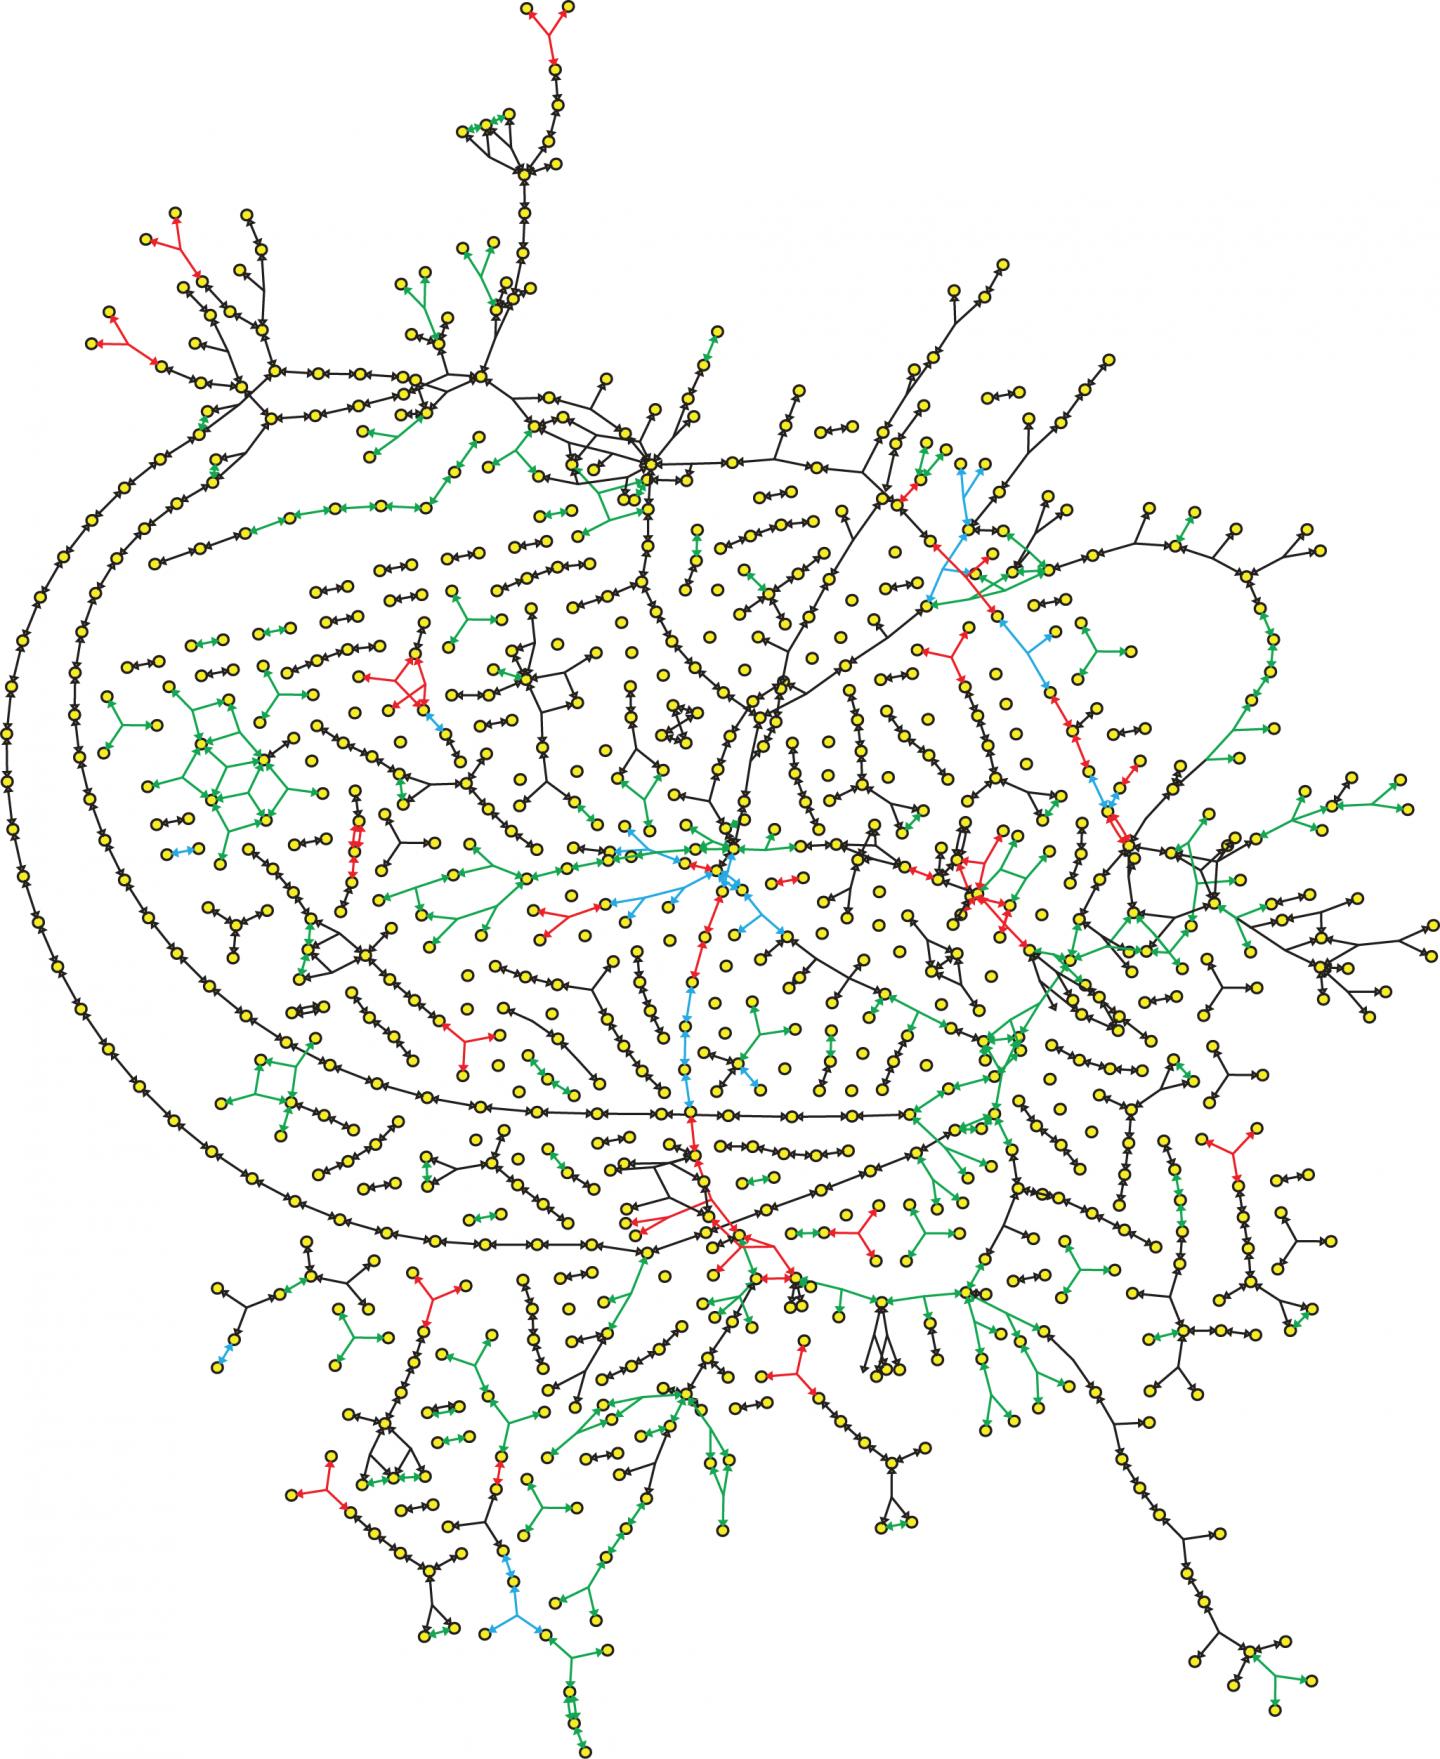 Genome-Scale Metabolic Network